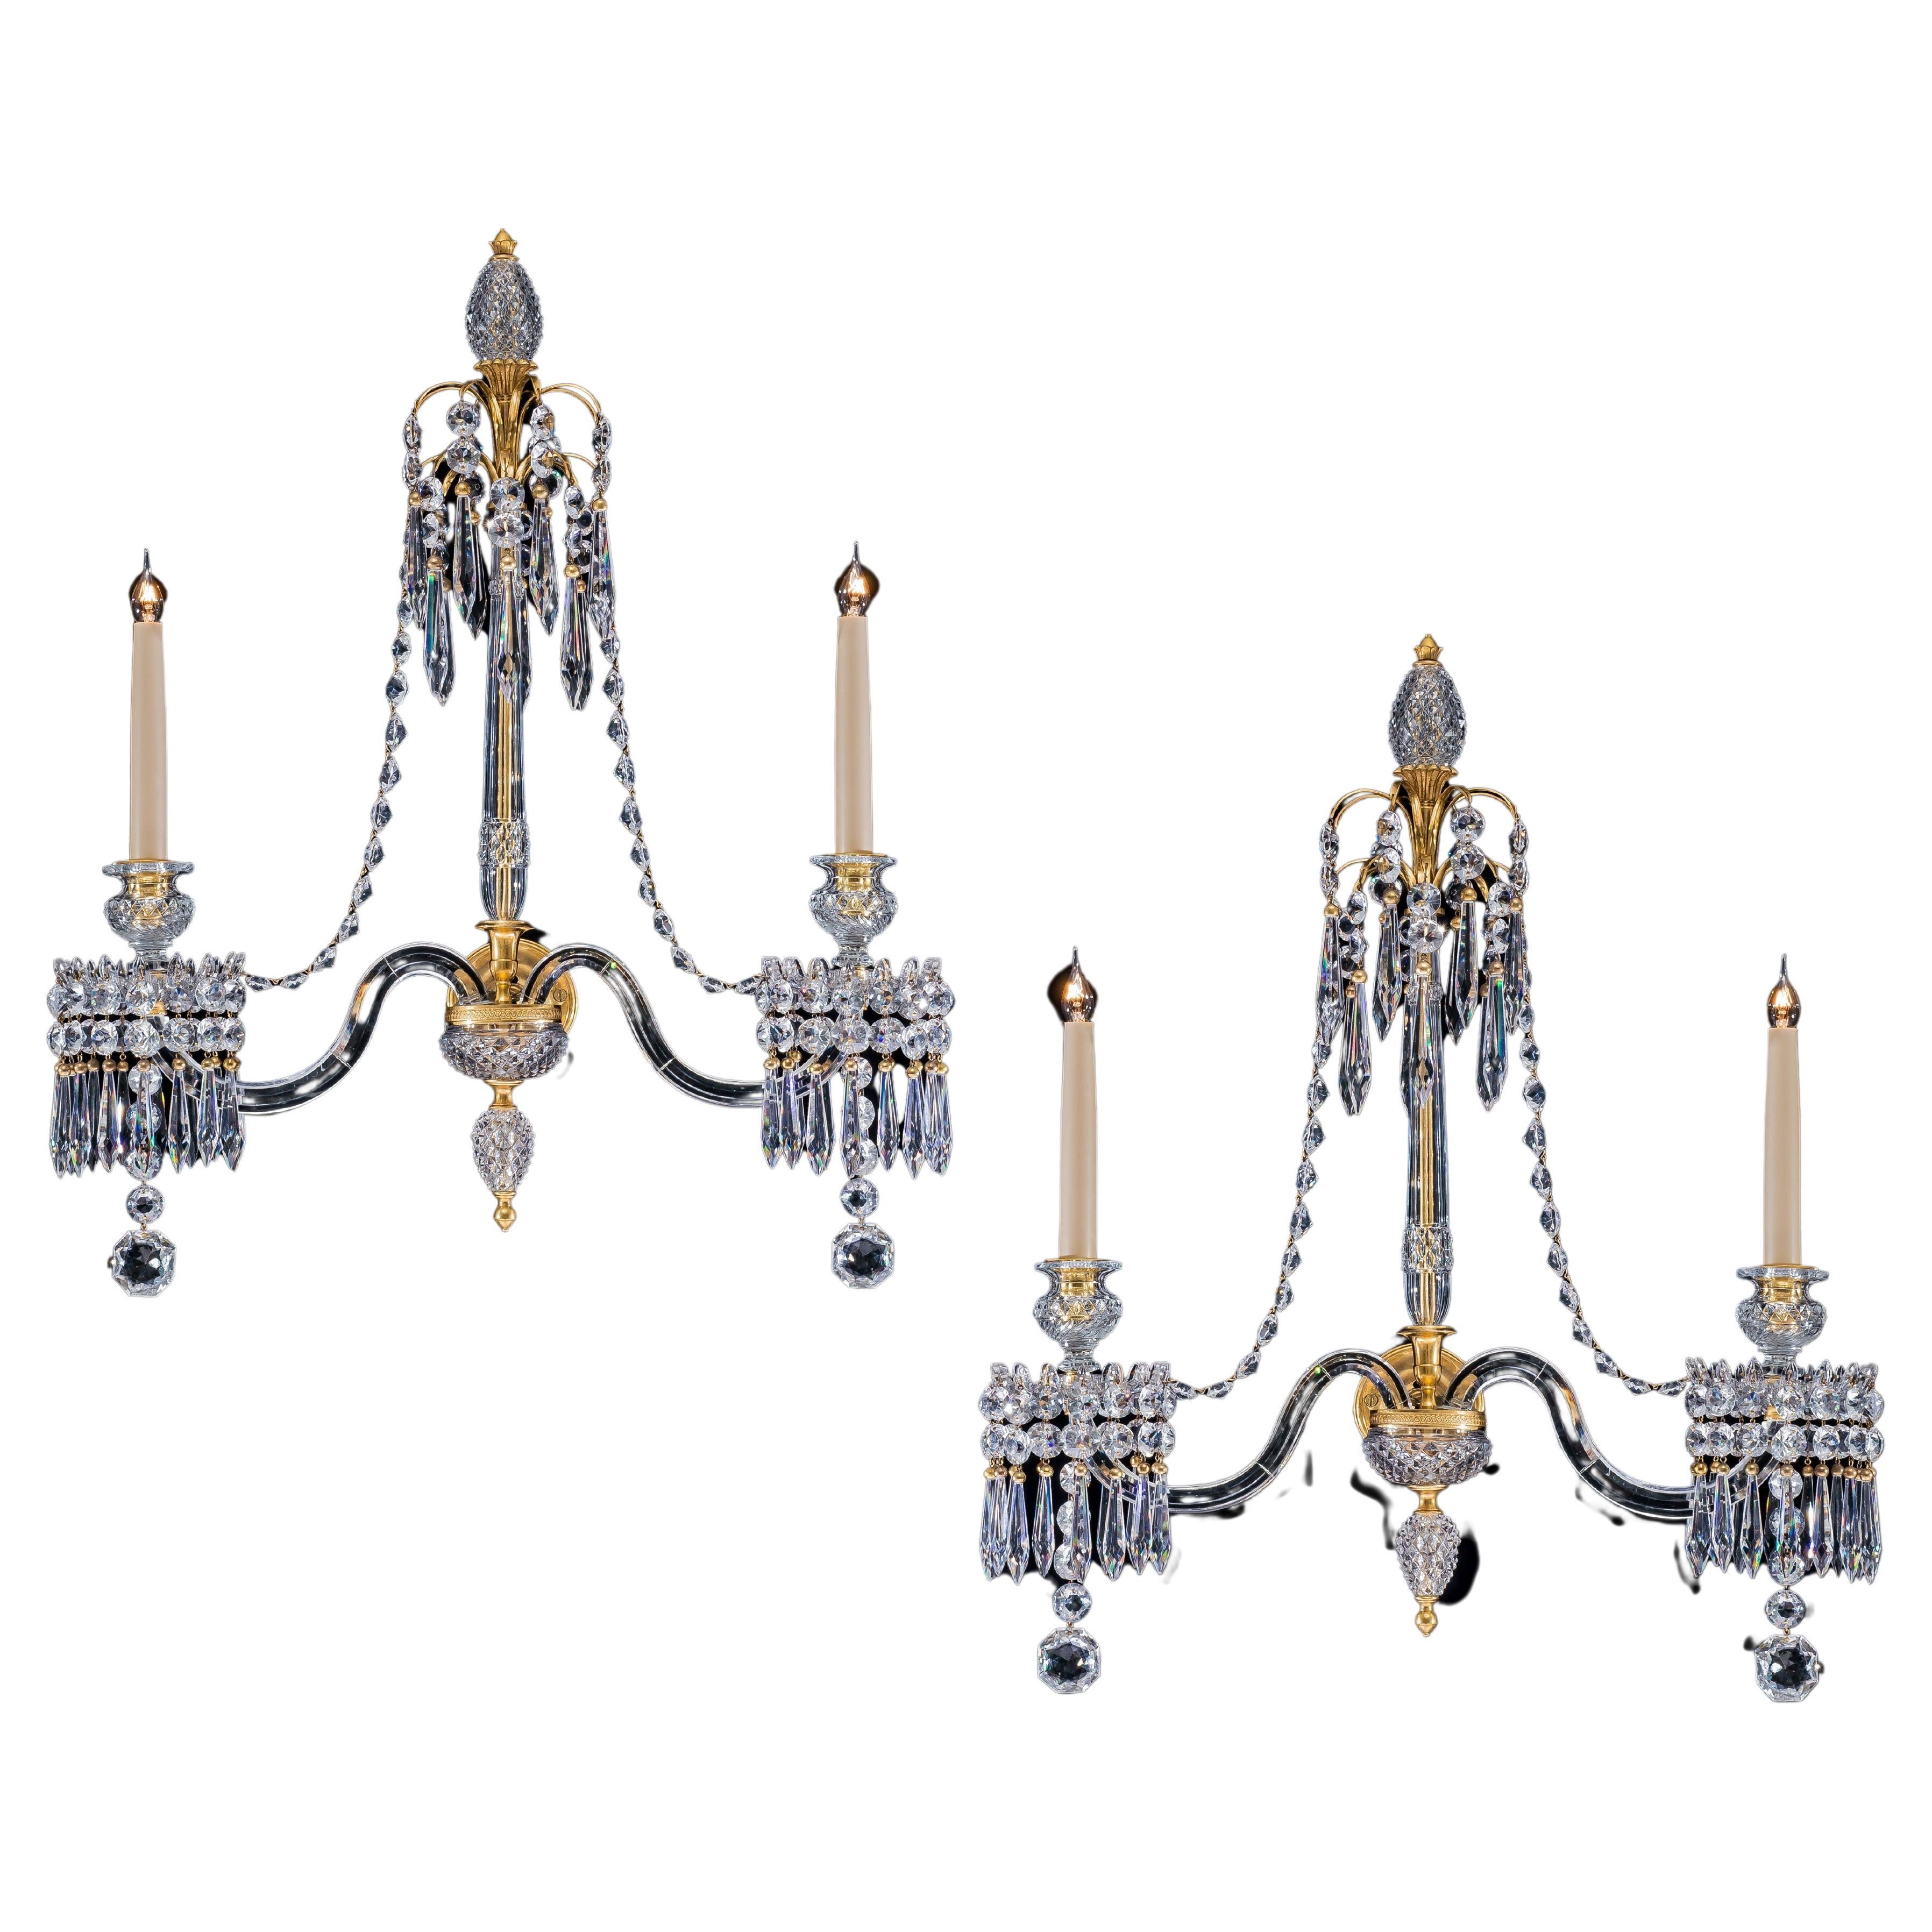 Highly Important Pair of English George III Period Wall Lights